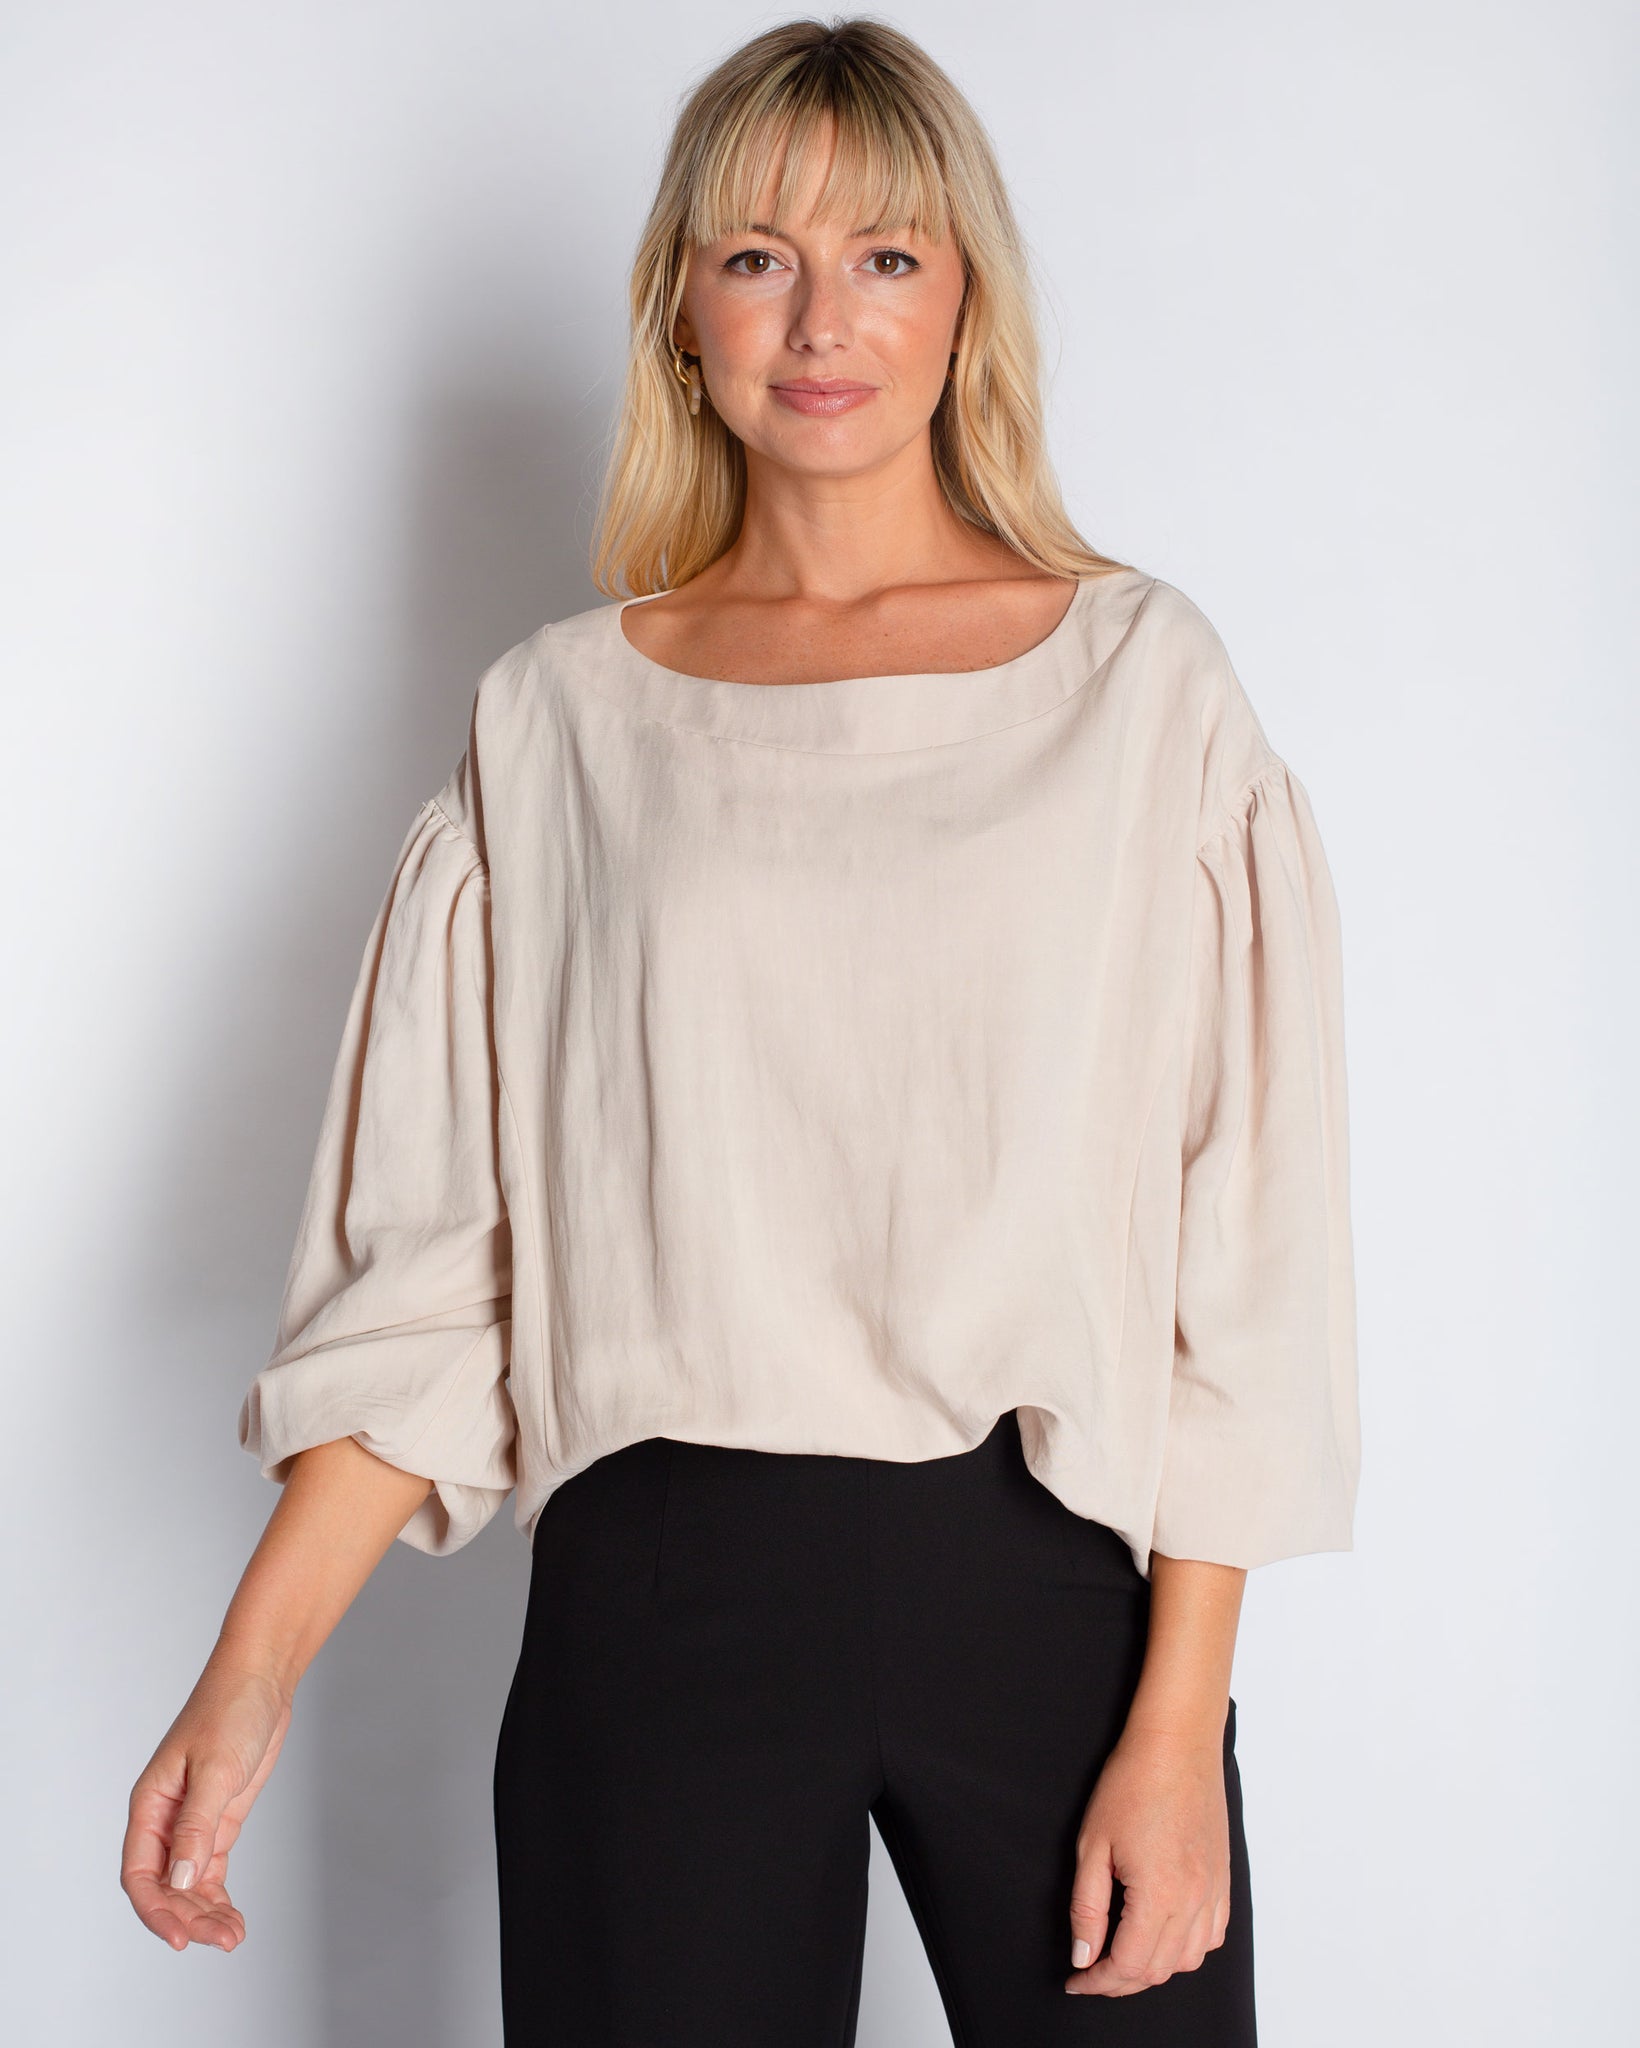 The Jewel Blouse in Linen